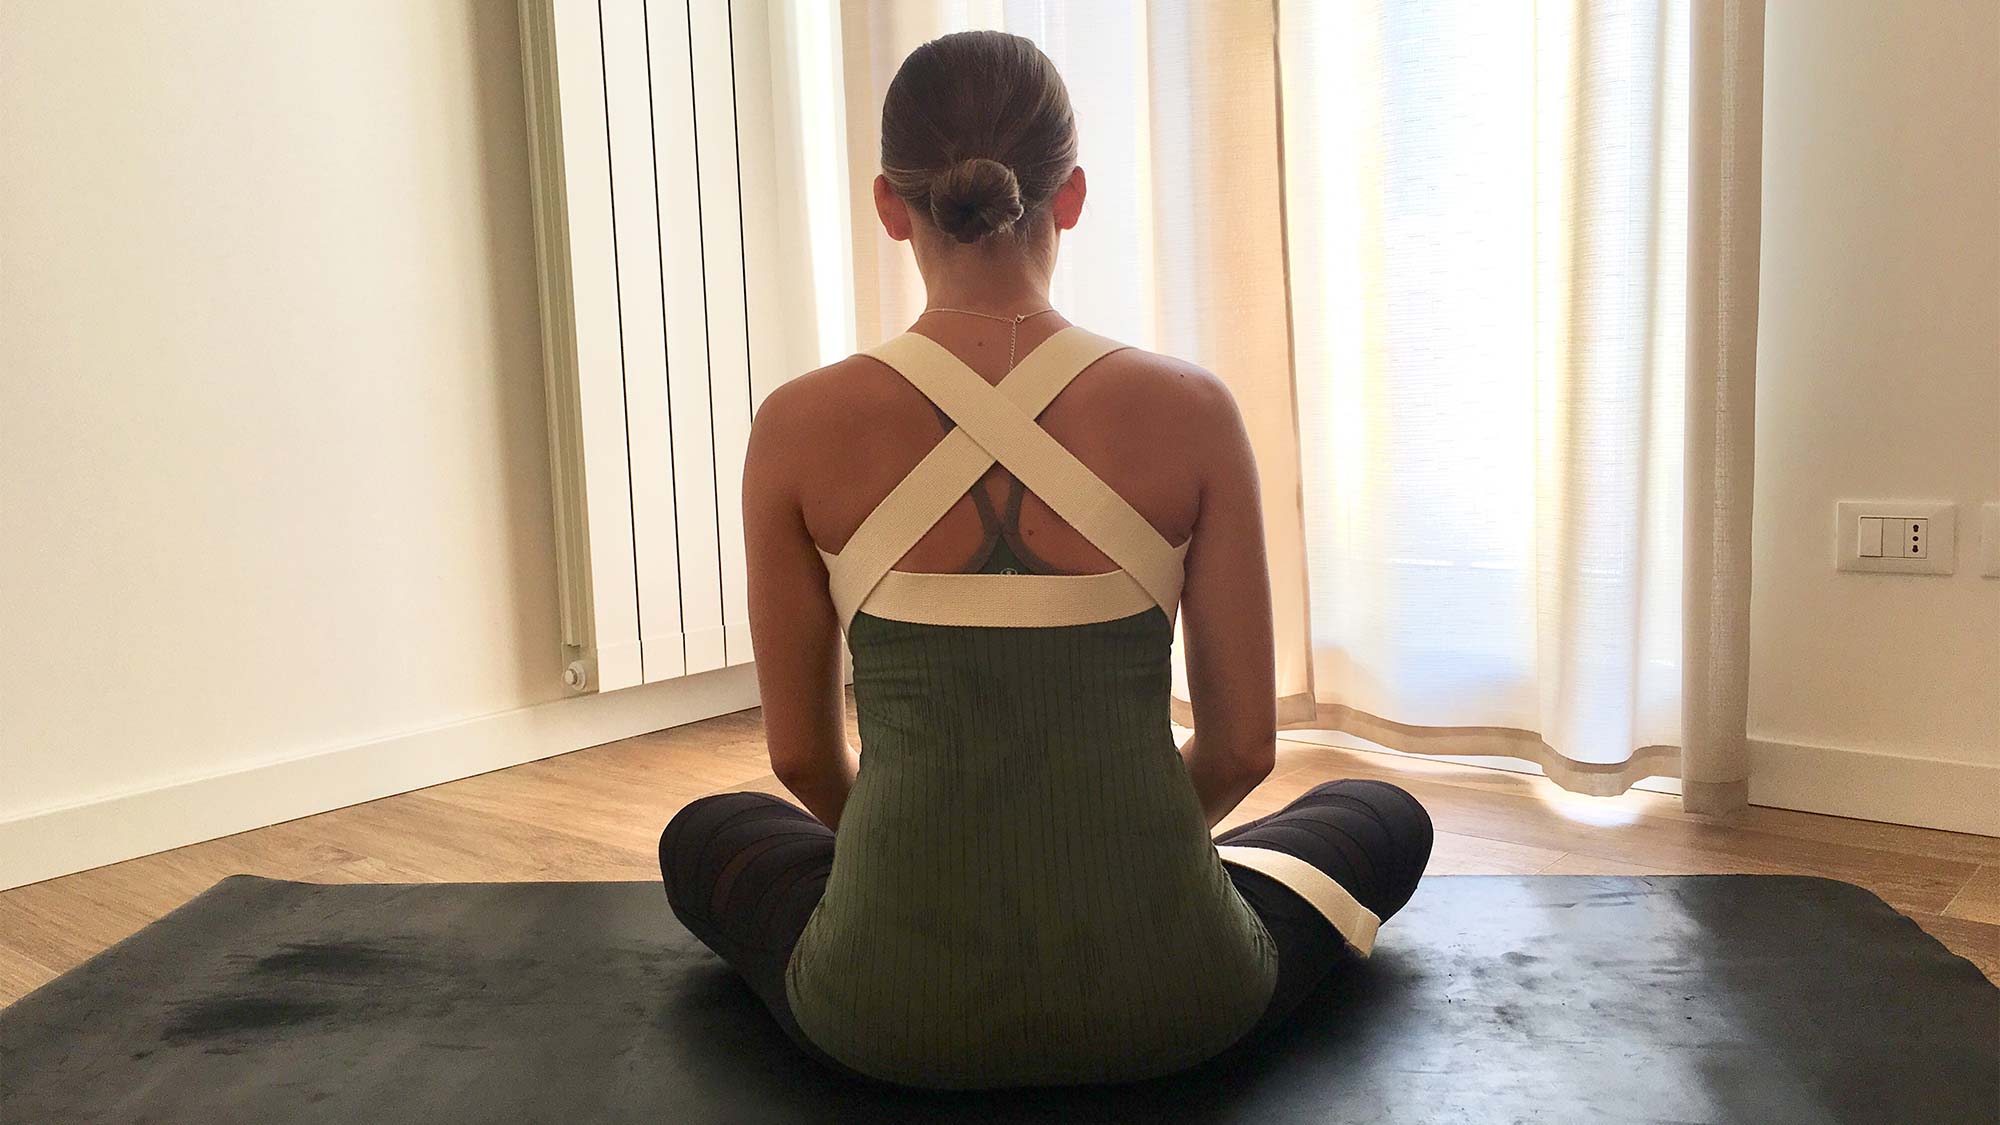 Use This $3 Yoga Strap for Shoulder Mobility (7 Ways)  Yoga strap, Yoga  strap stretches, Shoulder mobility exercises